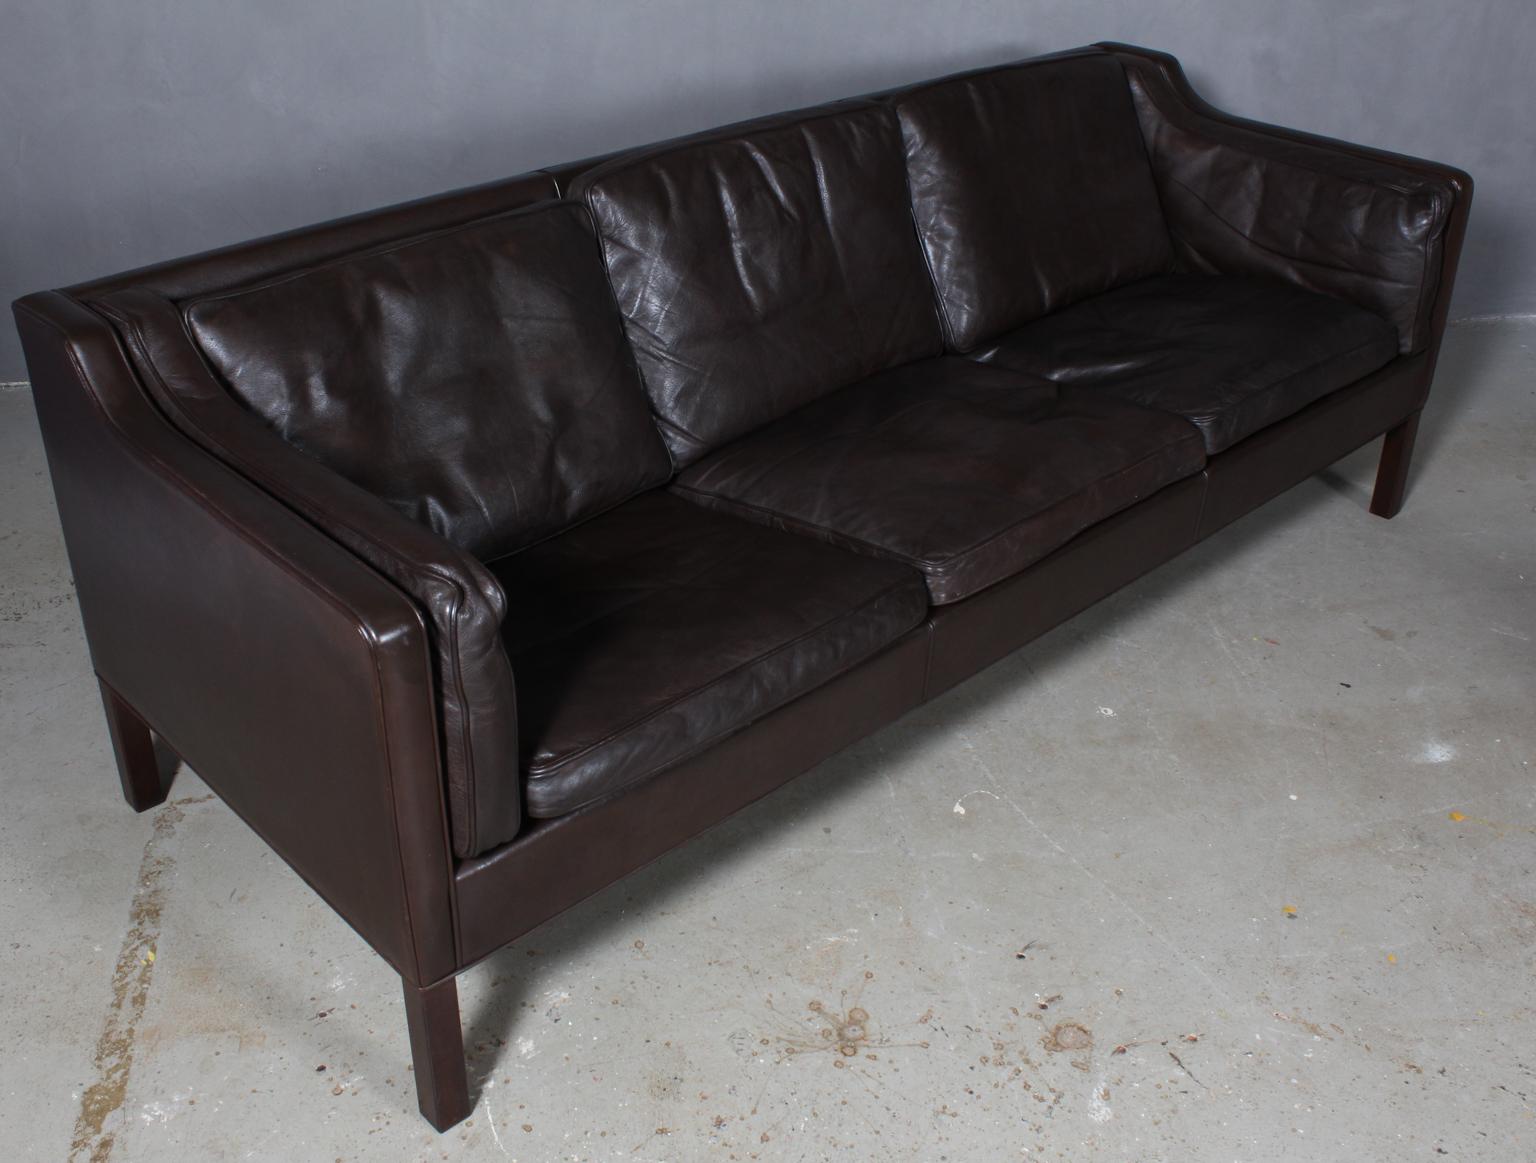 Børge Mogensen three-seat sofa with original brown leather upholstery.

Legs of mahogany.

Model 2213, made by Fredericia Furniture.